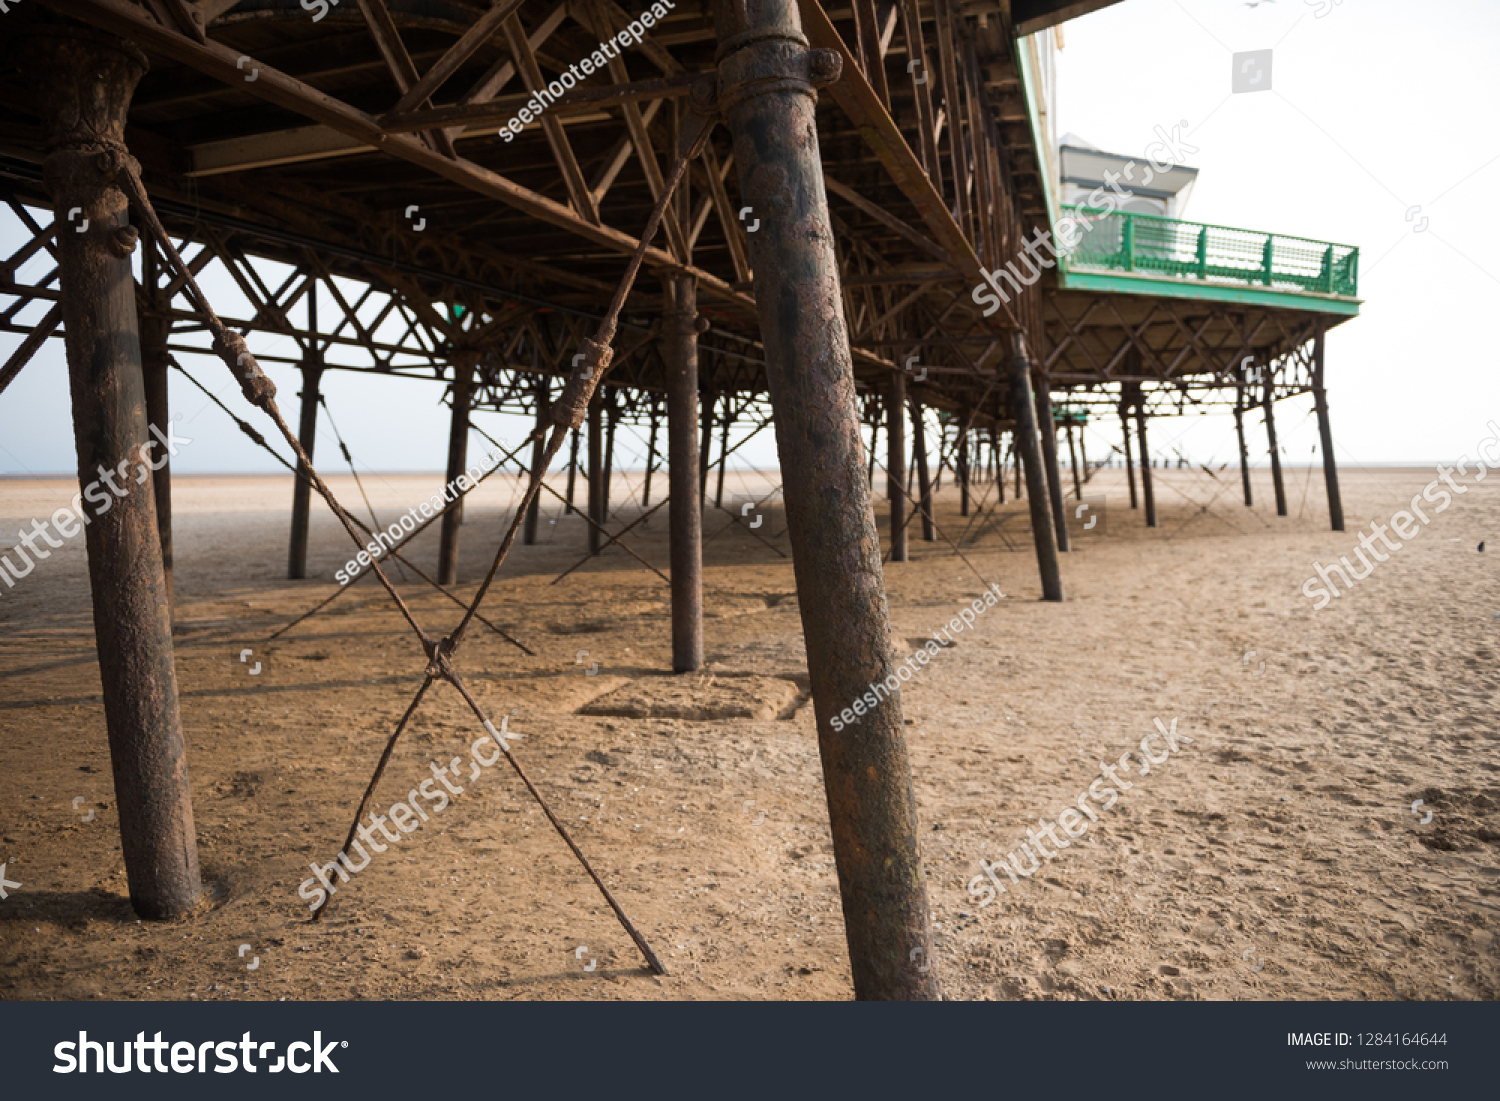 A beautiful old vintage steel iron victorian seaside pier structure shot from beneath, victorian architecture on the sandy beach, seaside landmark buildings. #1284164644